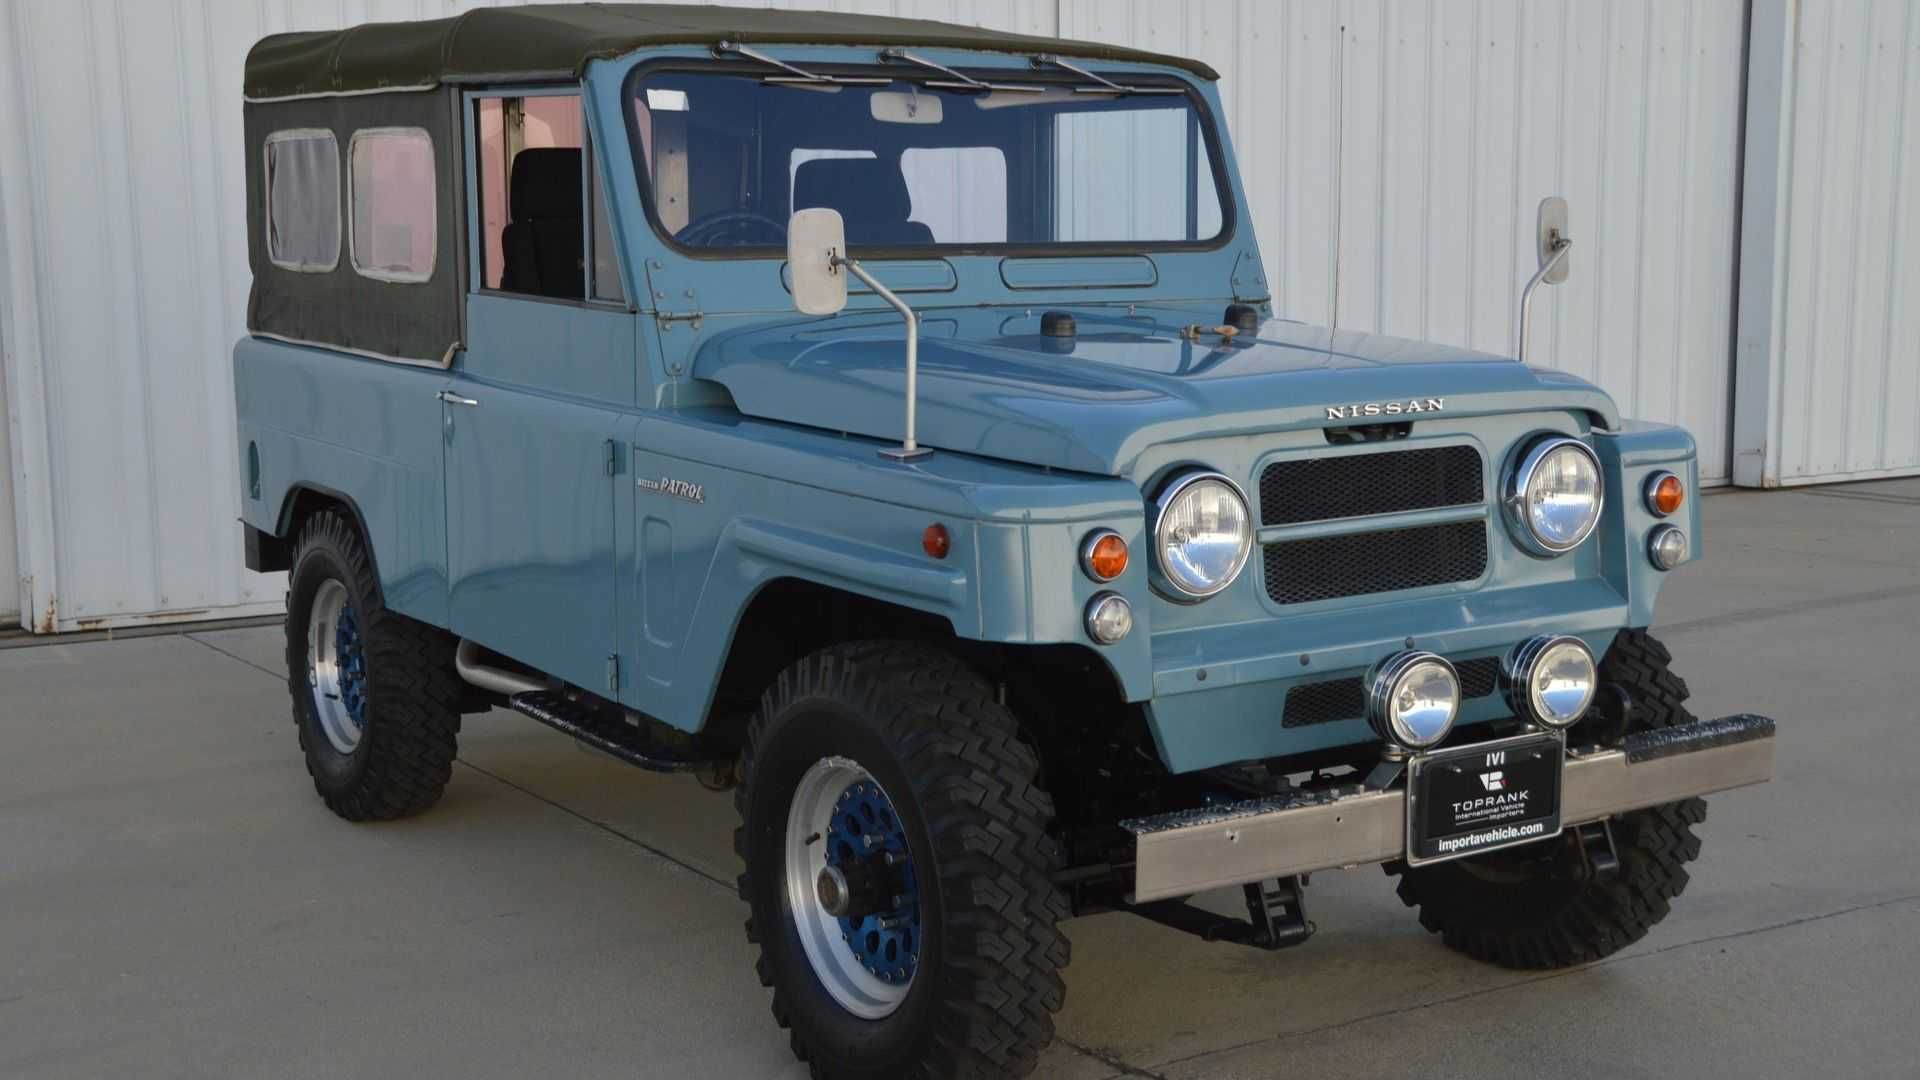 The 1984 Nissan Patrol Is the “Other” Cool Japanese SUV 